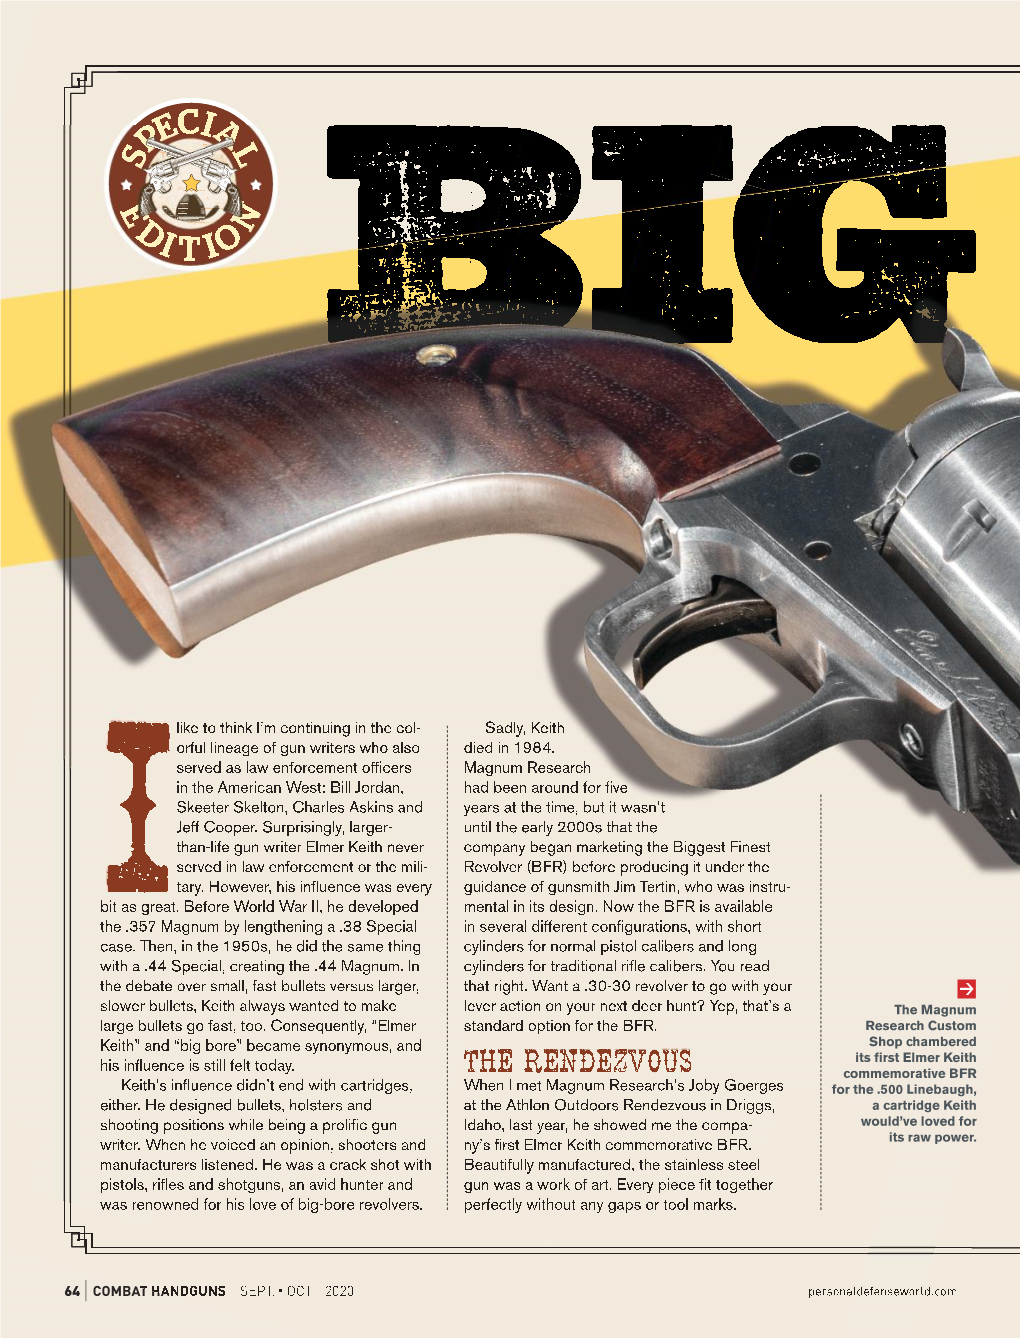 Was Renowned for His Love of Big-Bore Revolvers. Standard Option for The